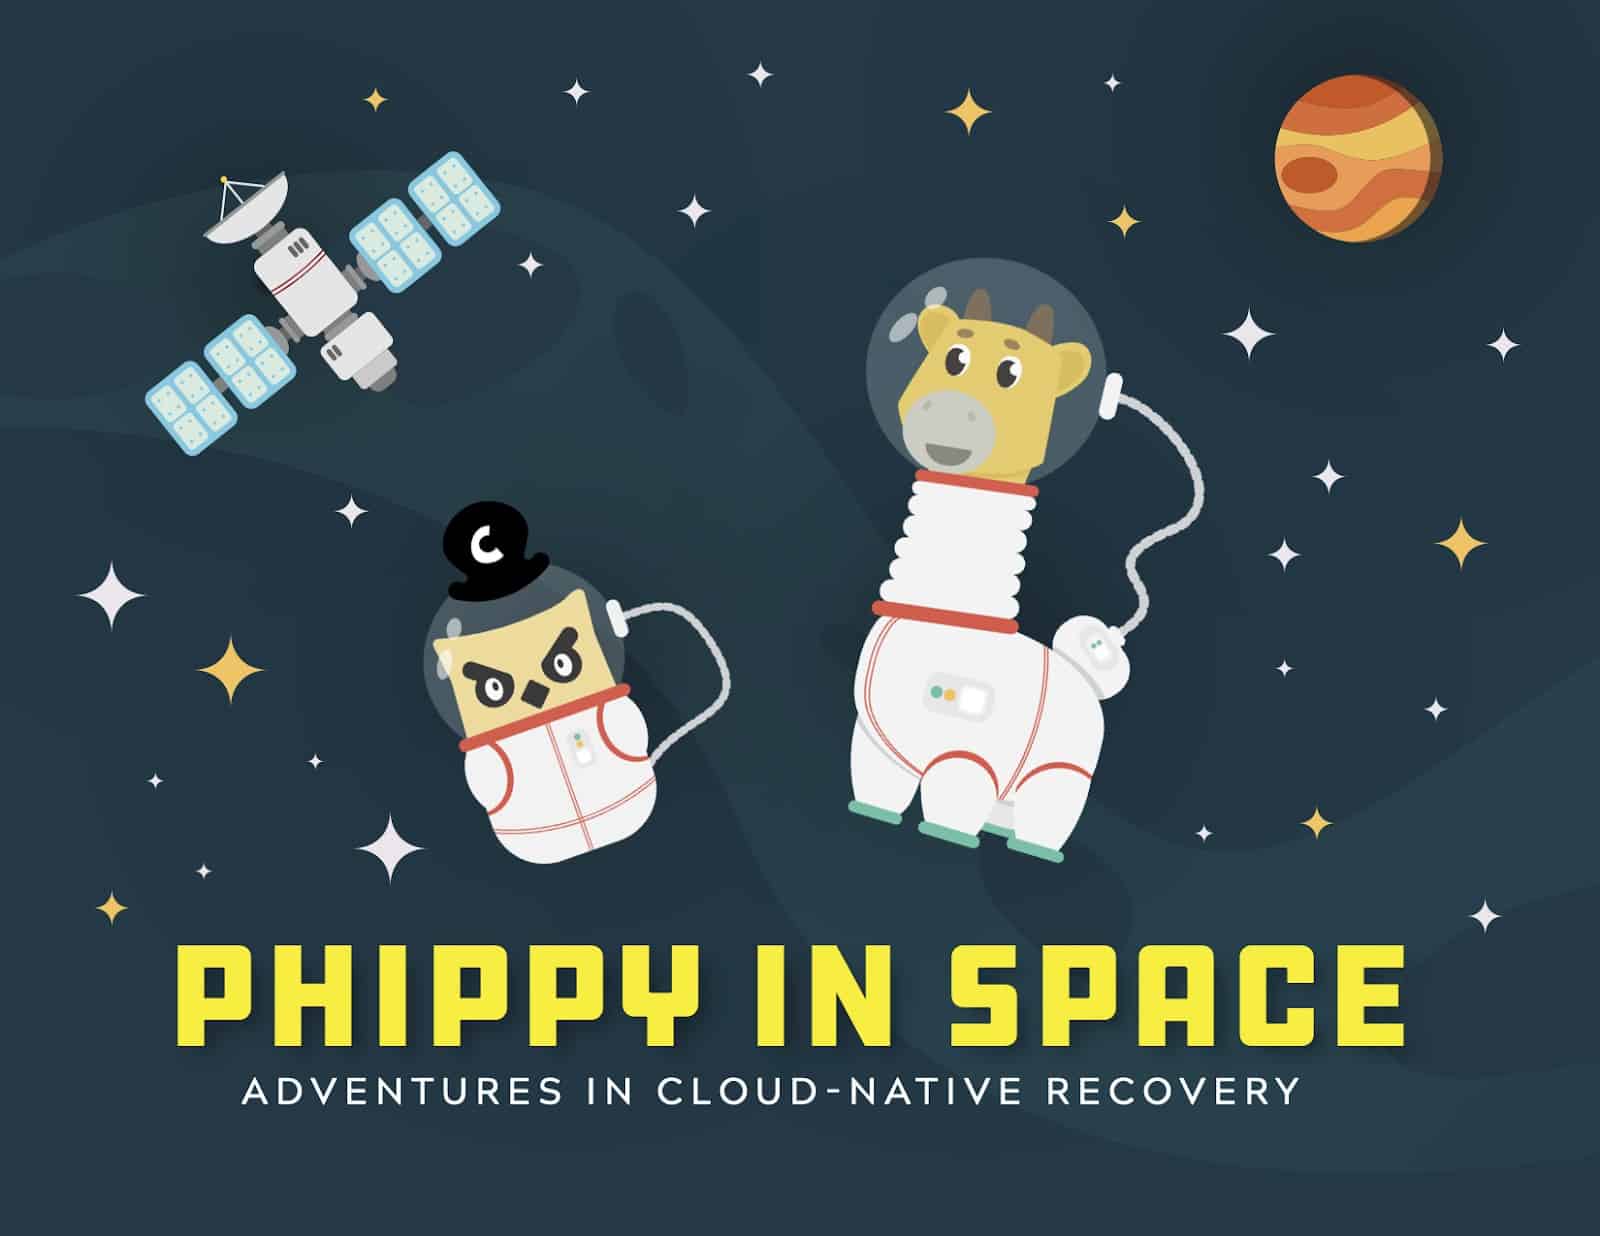 Phippy and Captain Kube floating in space